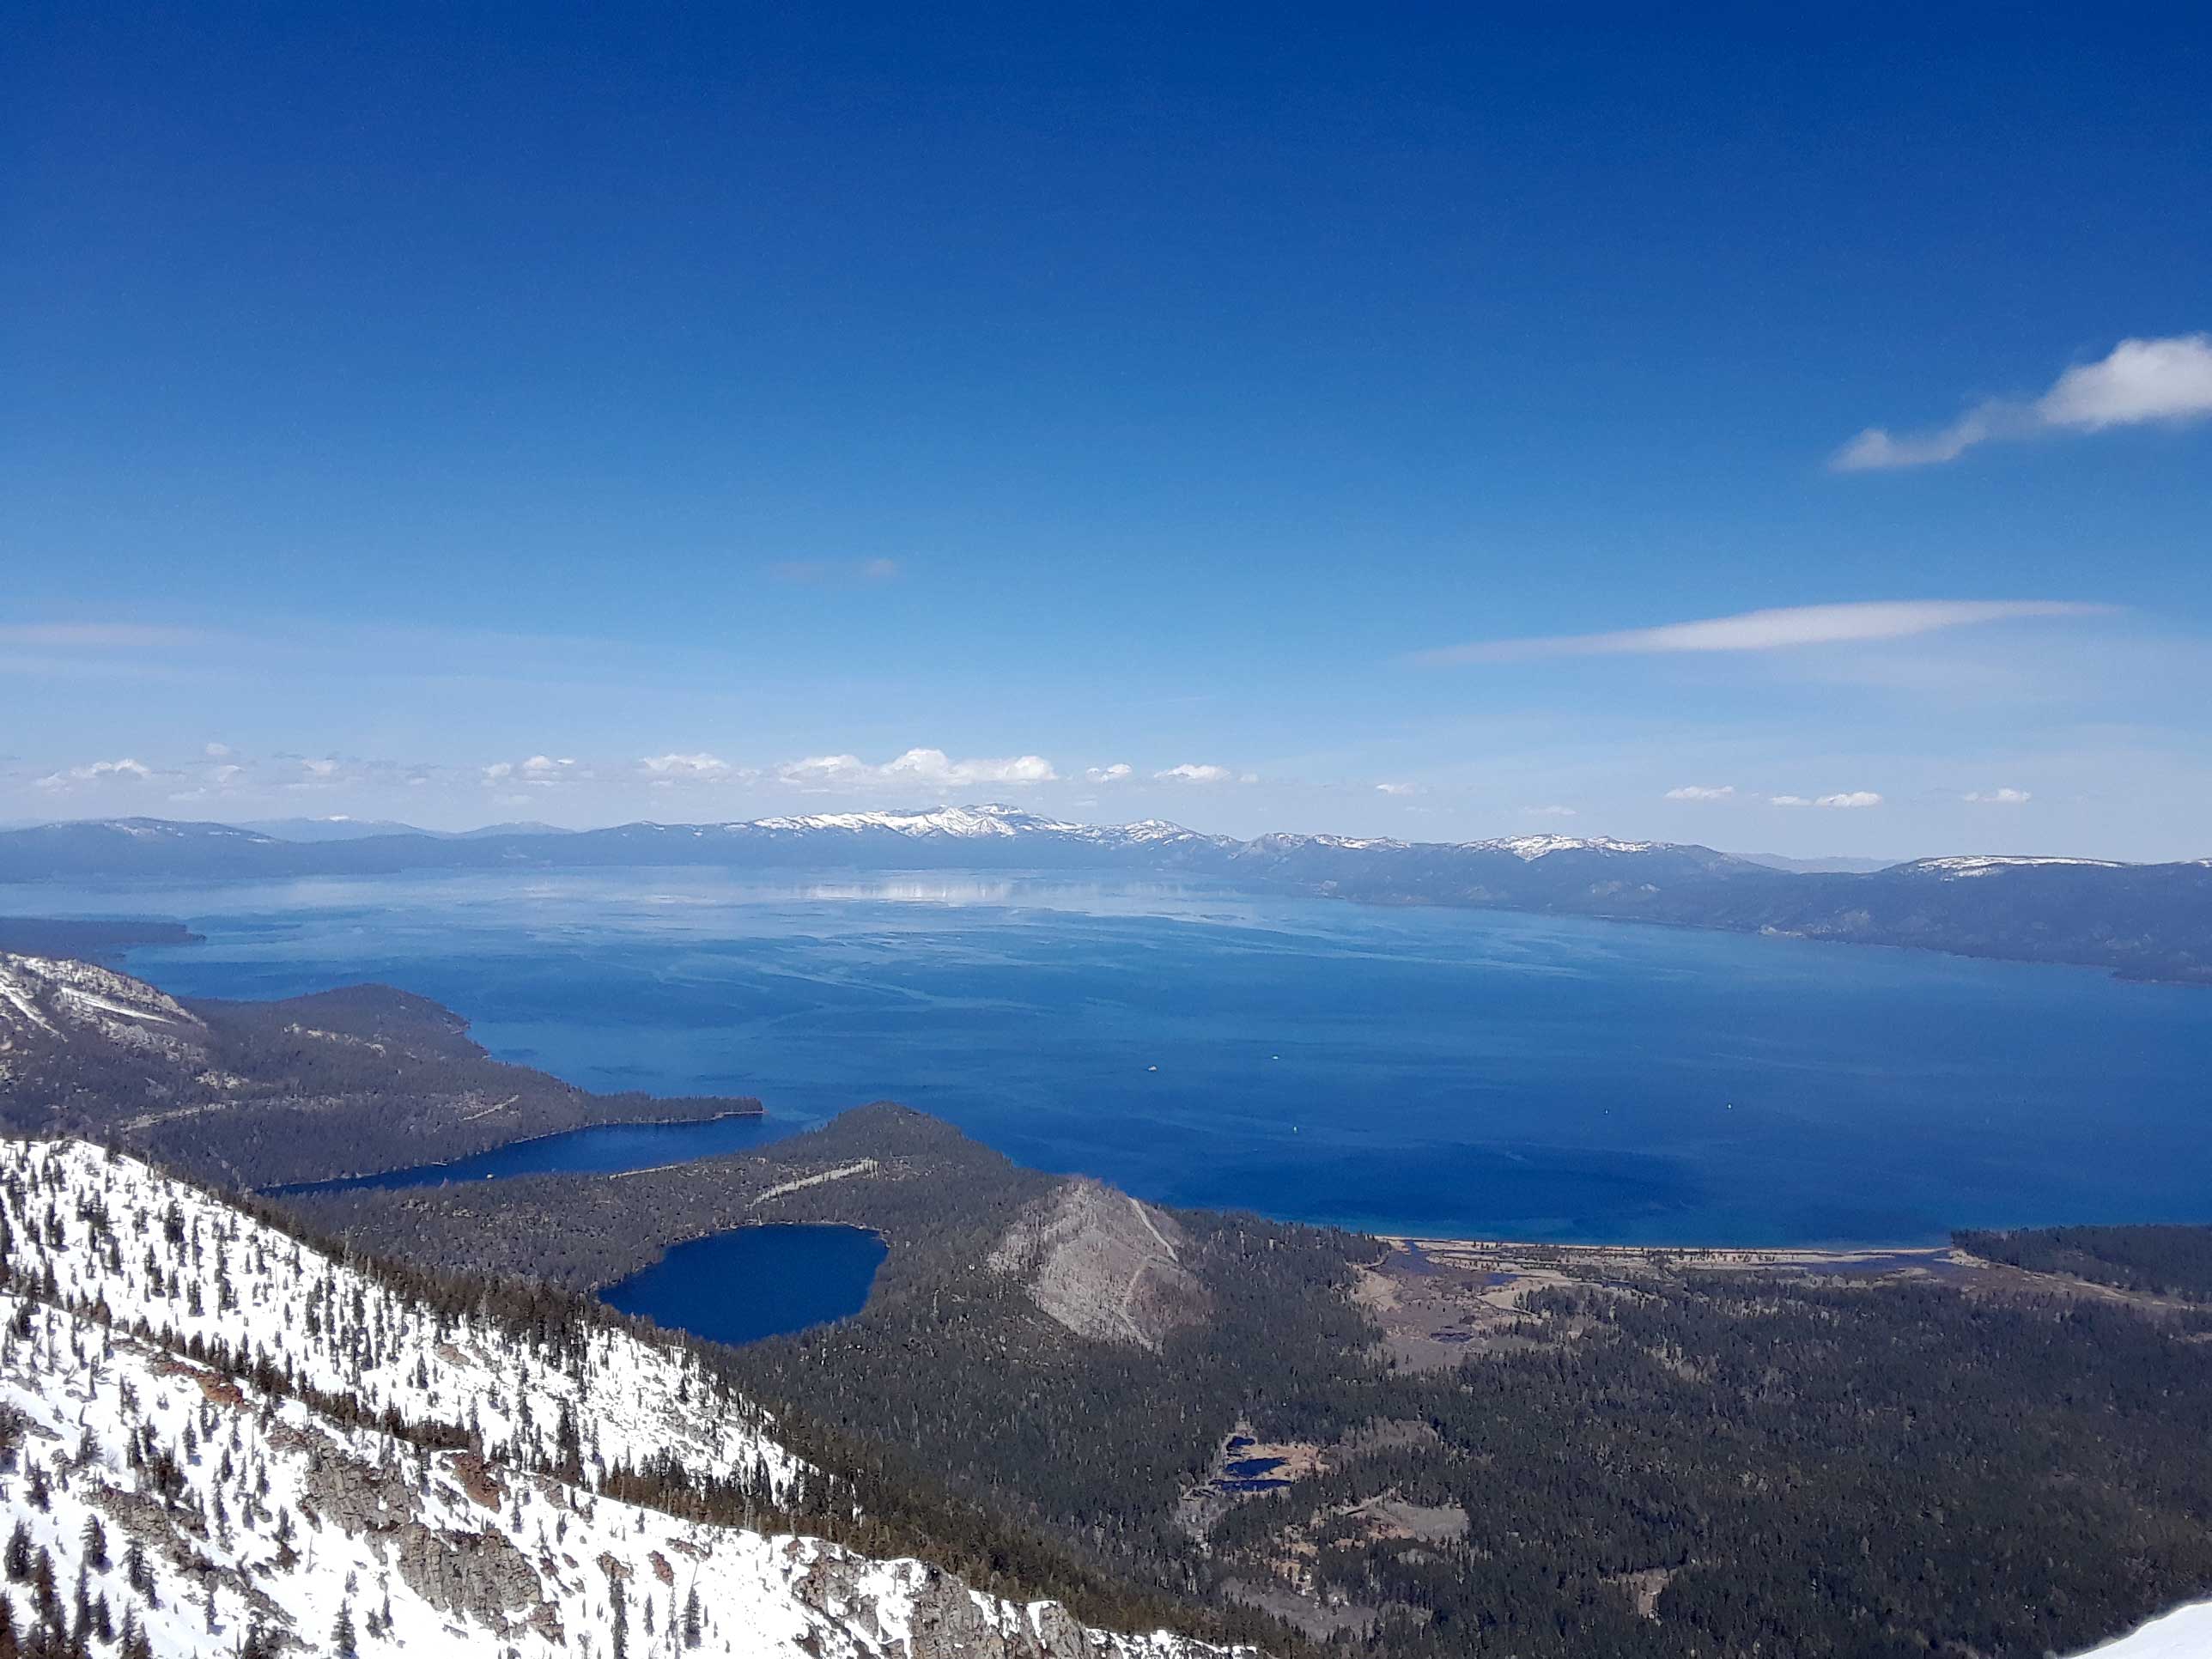 Tallac Mt has the best views of Lake Tahoe